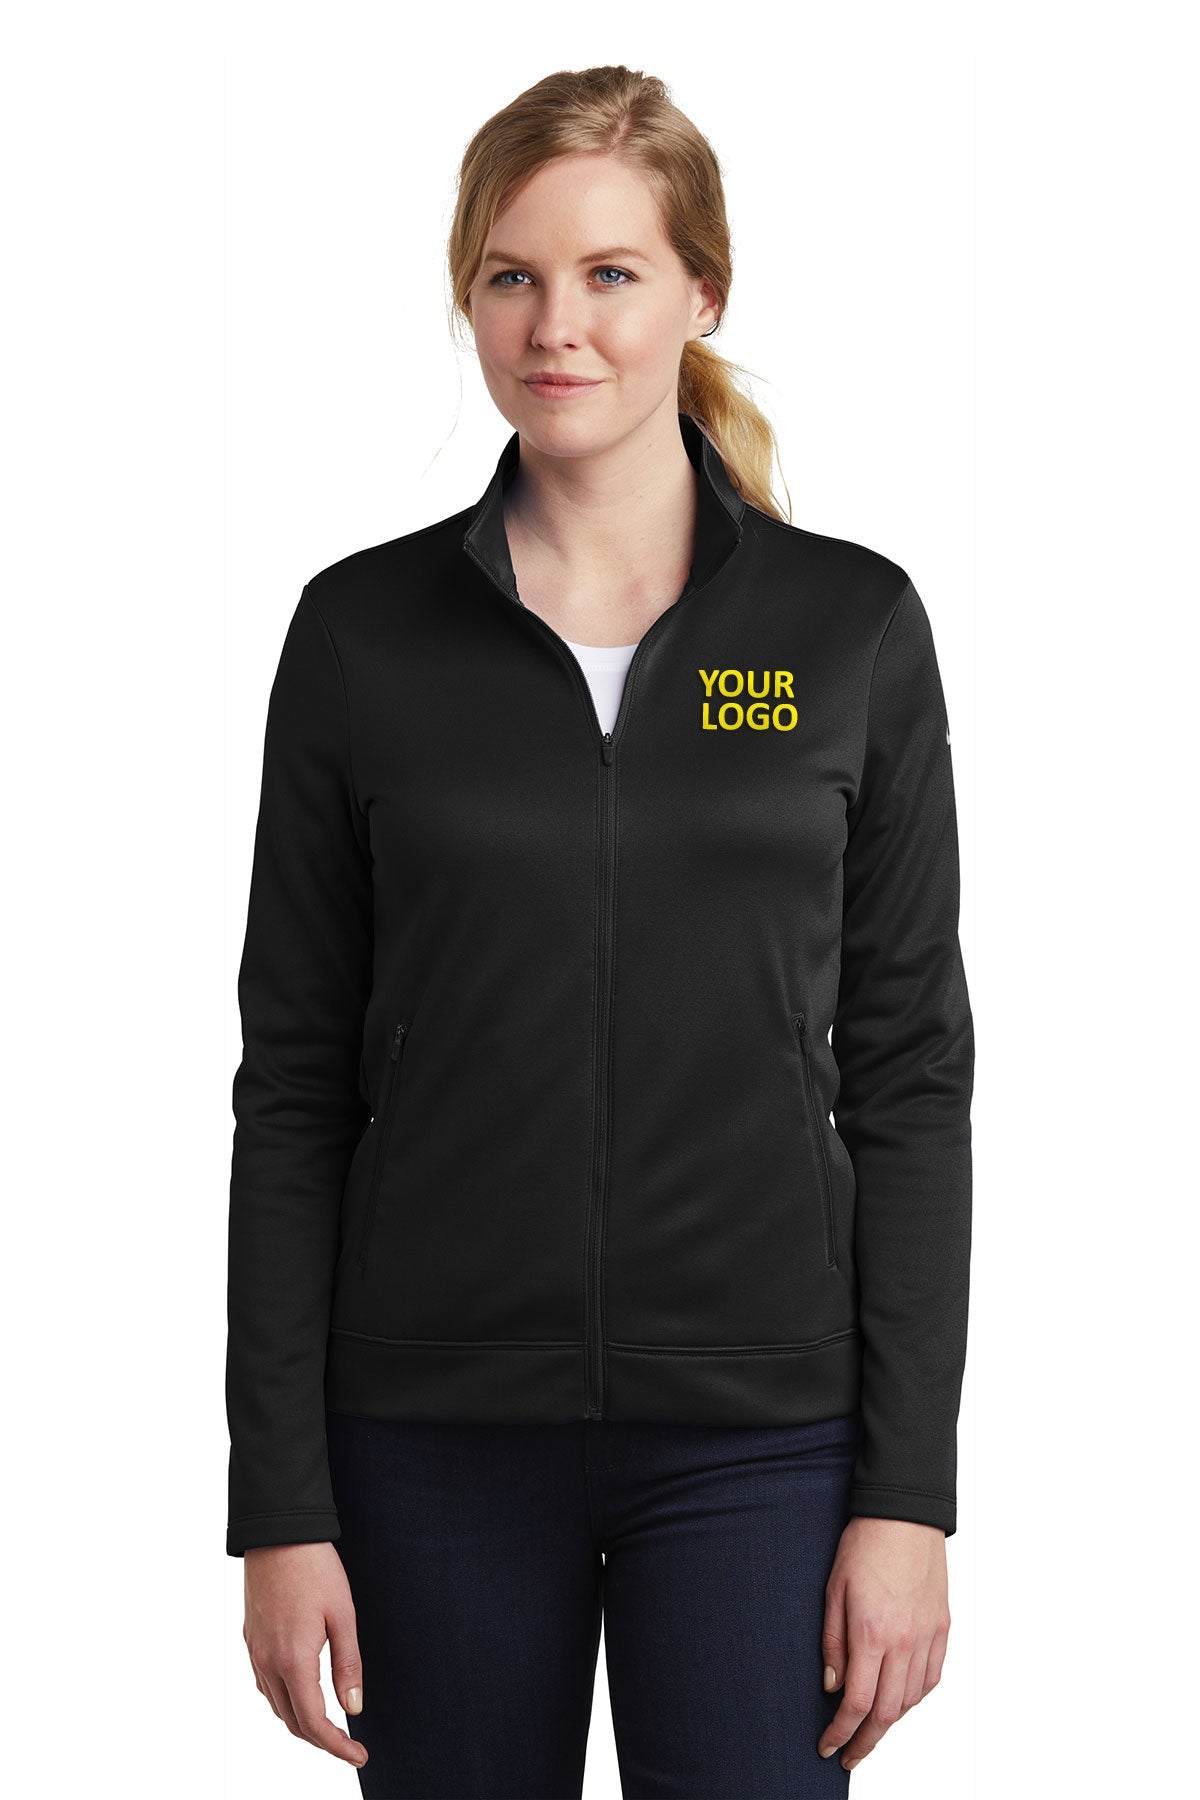 Nike Black NKAH6260 embroidered jackets for business